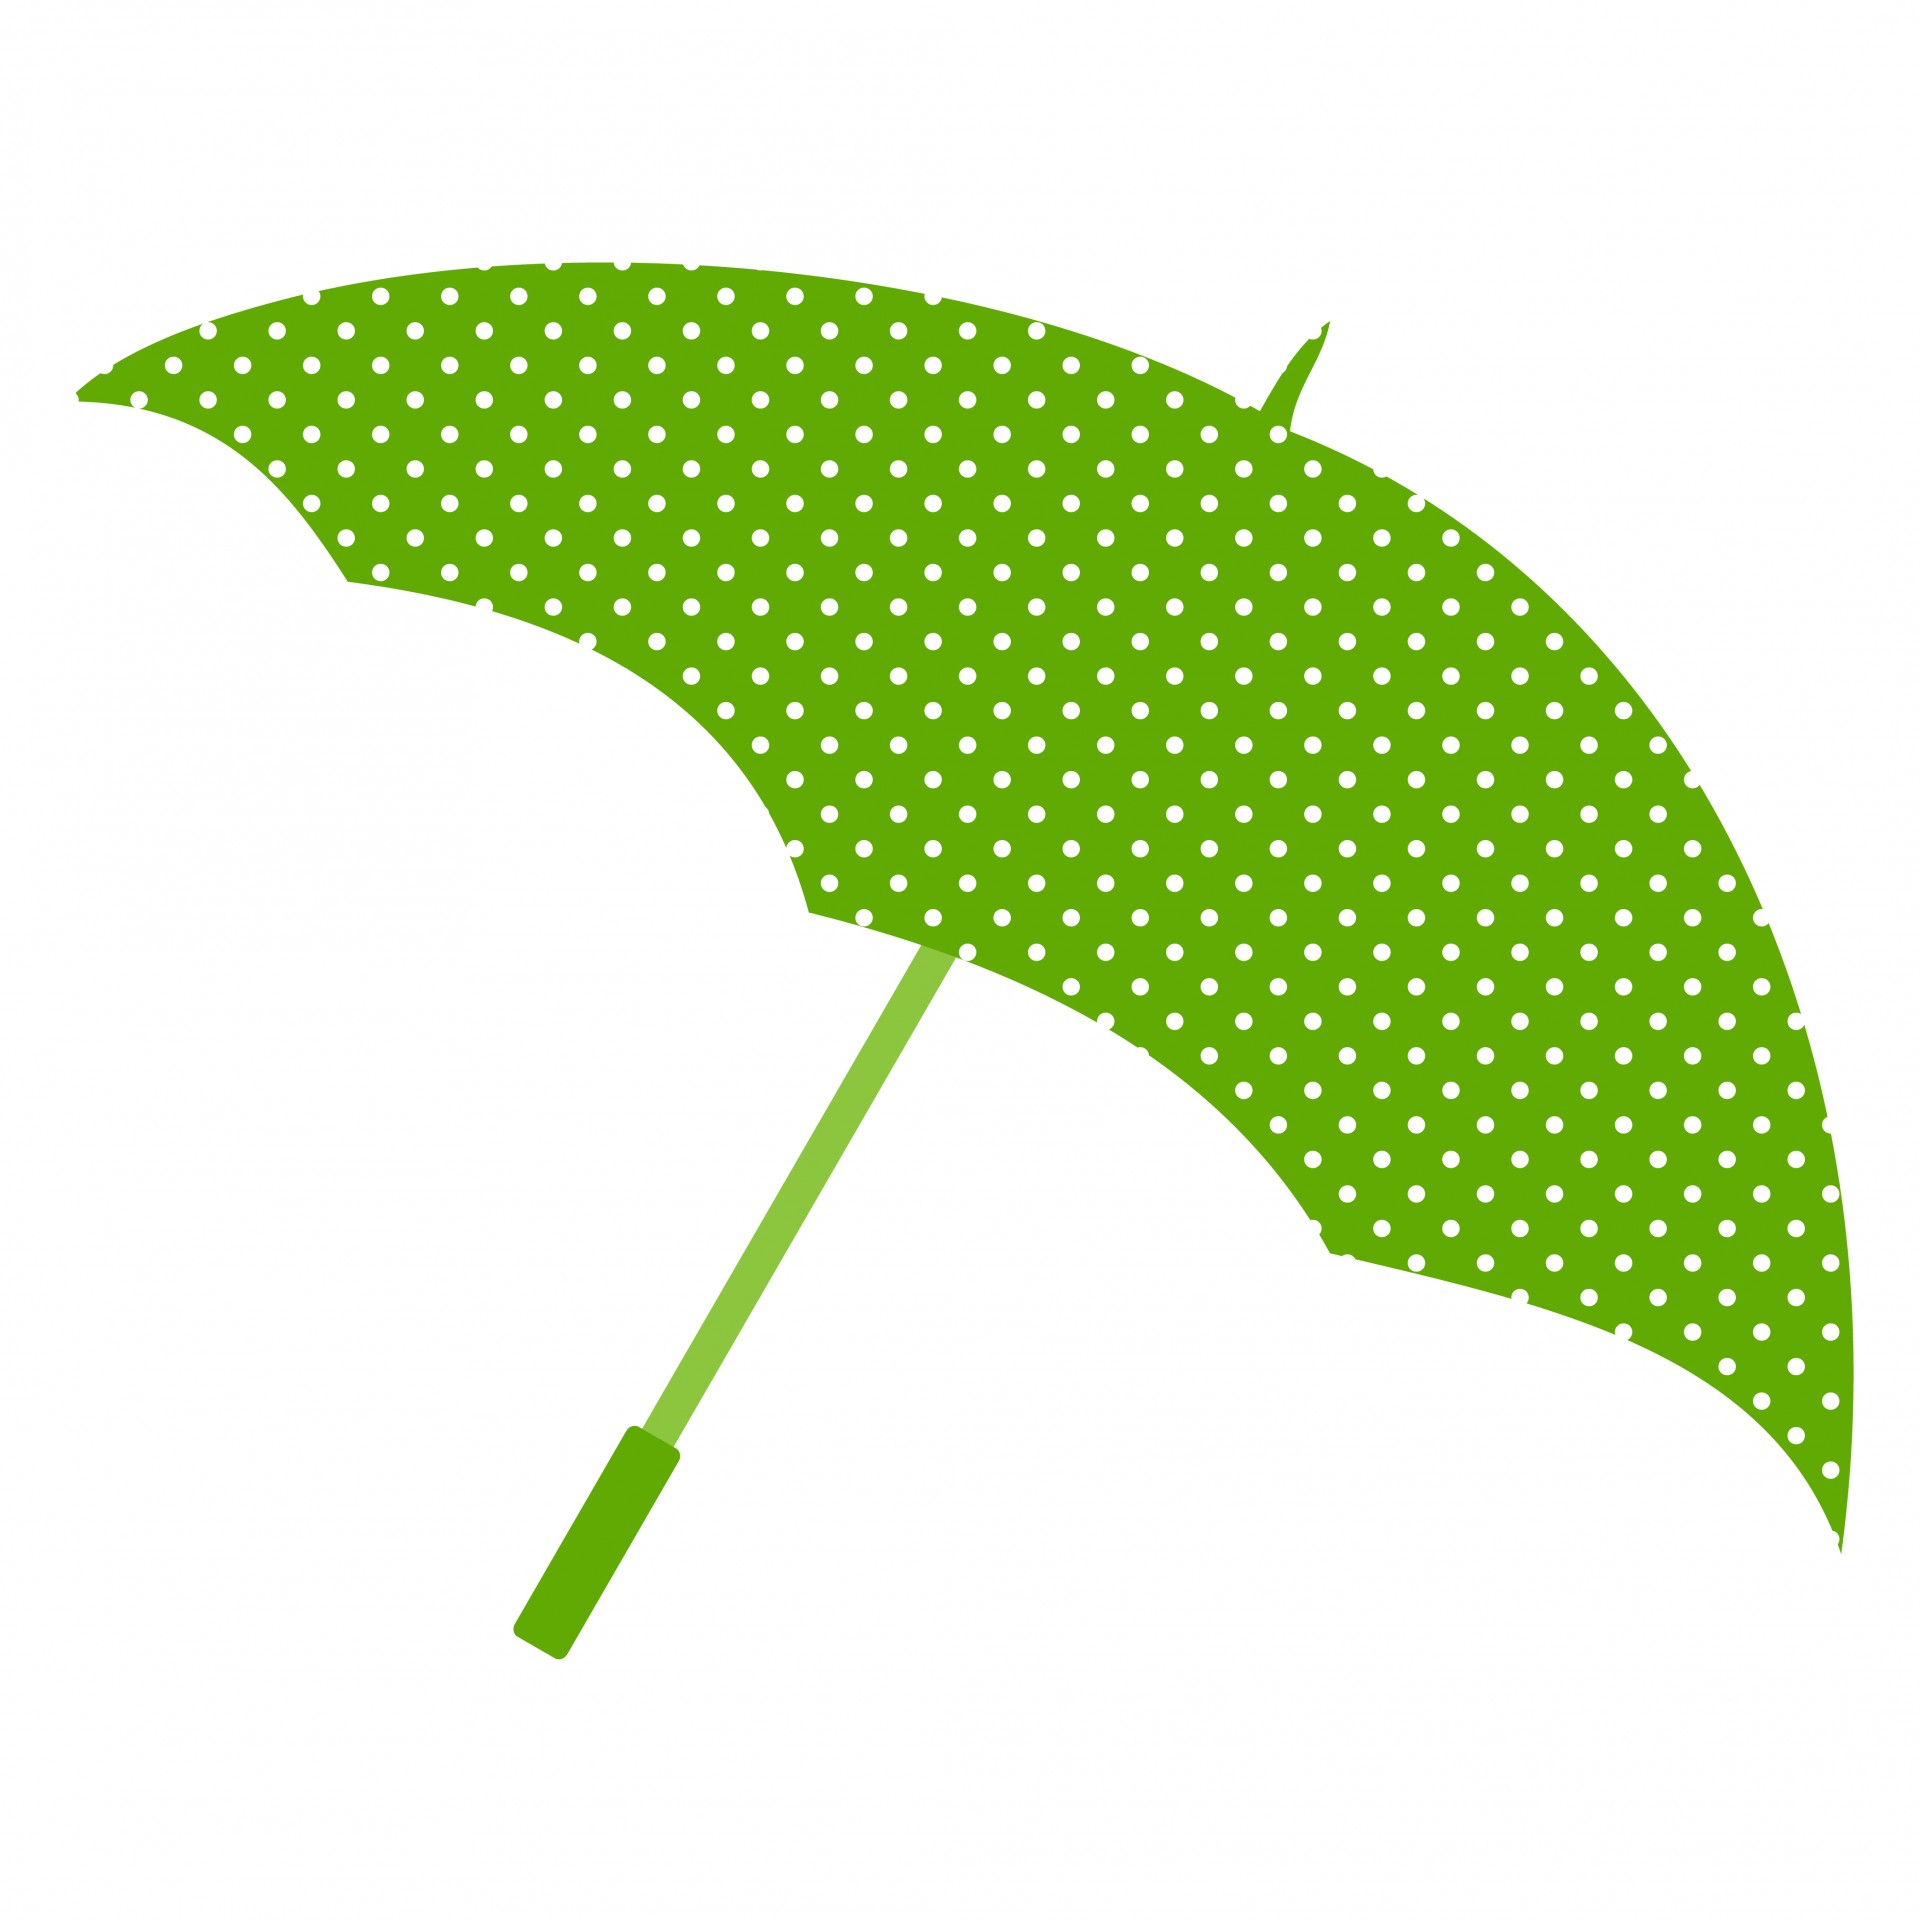 Green and white polka dots umbrella clipart for scrapbooking